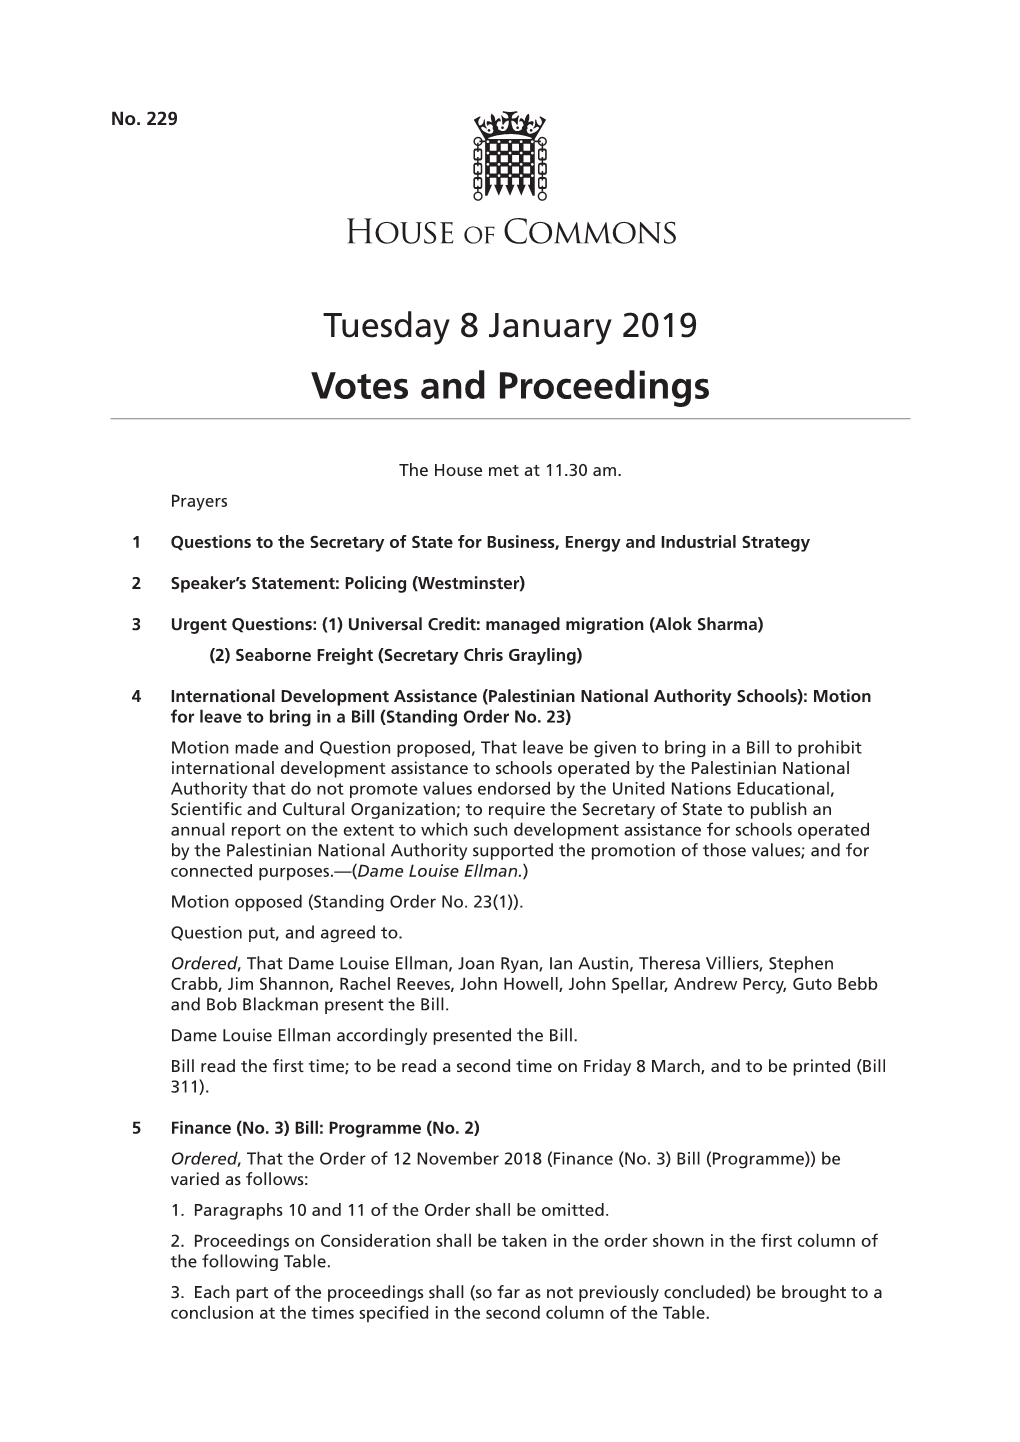 Votes and Proceedings 8 January 2019